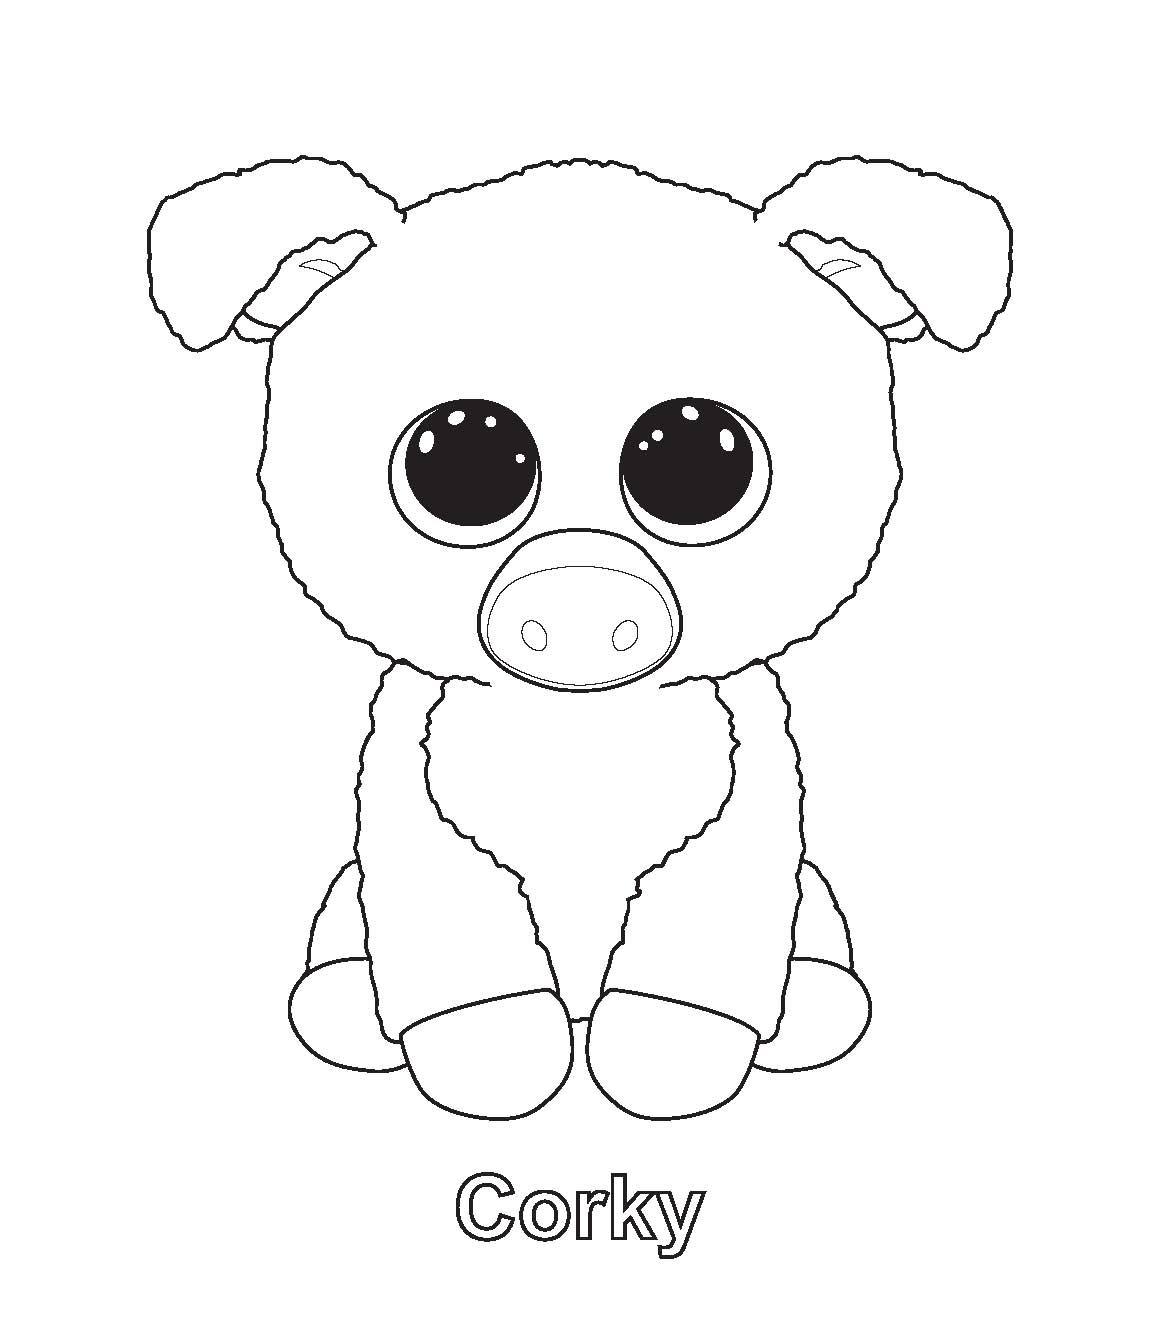 Corky Beanie Boo Coloring Pages